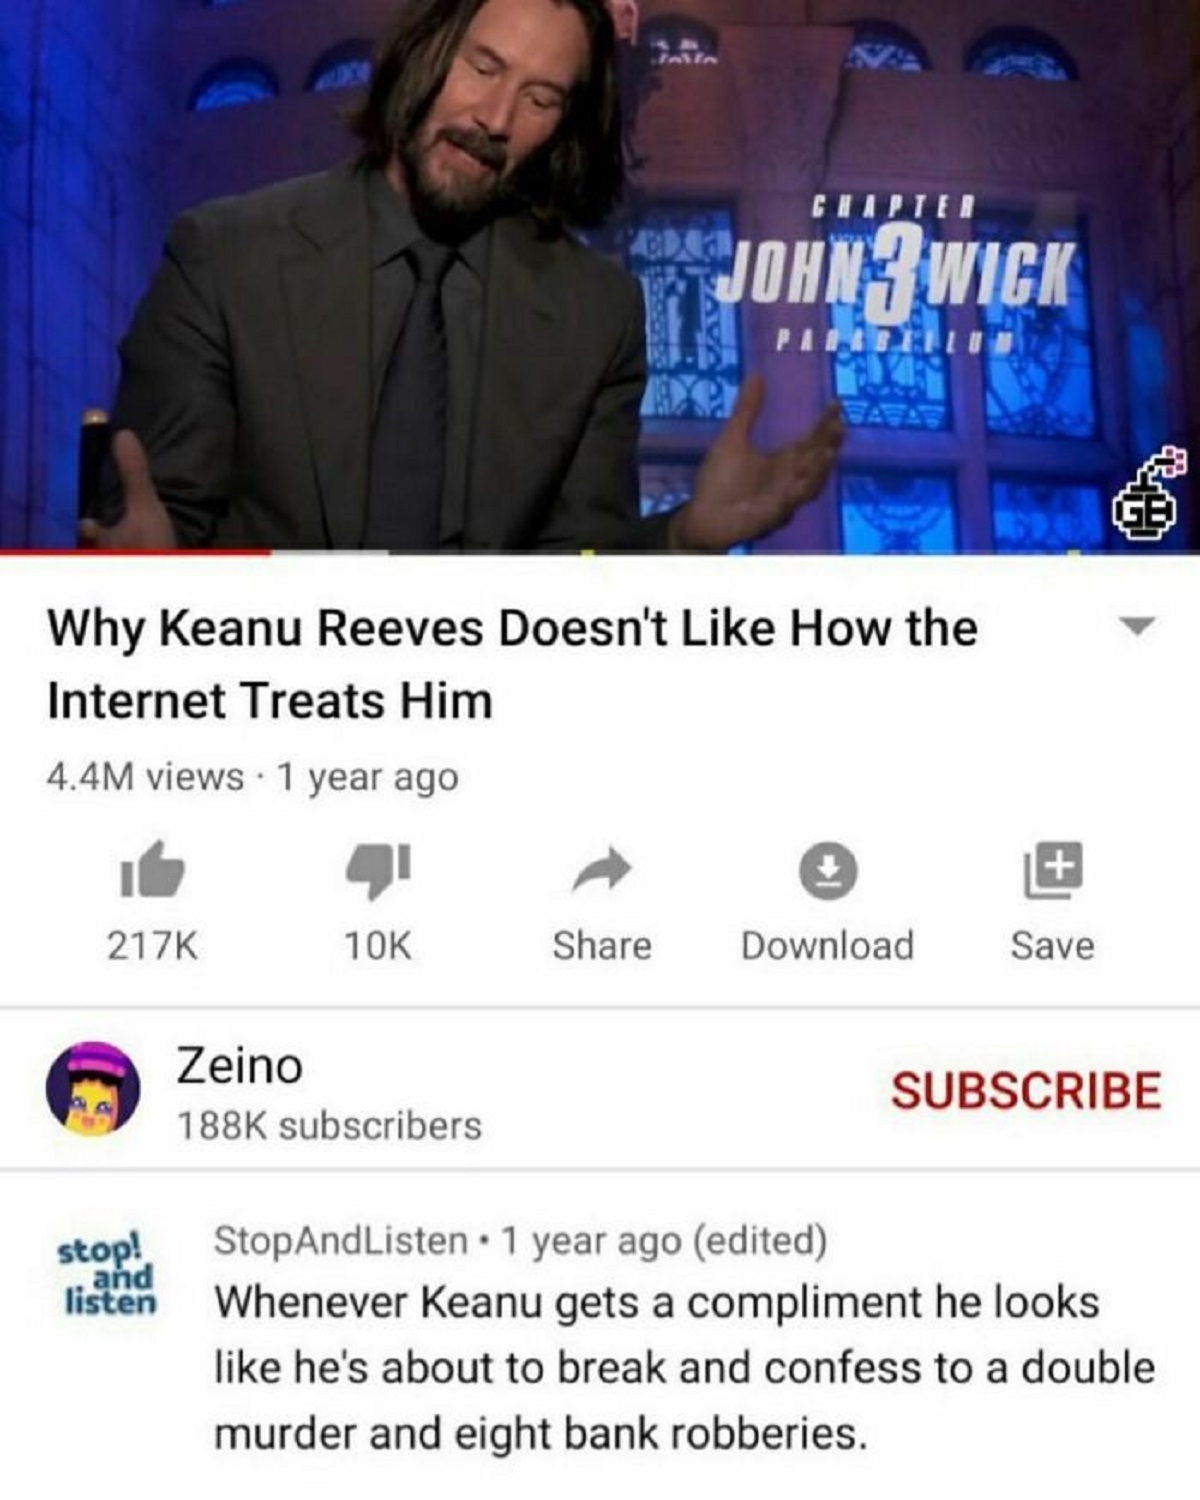 had a brain eating amoeba once - 337 Chapt John Wick Parabellu Why Keanu Reeves Doesn't How the Internet Treats Him 4.4M views 1 year ago 10K Download Save stop! and listen Zeino Subscribe subscribers StopAnd Listen 1 year ago edited Whenever Keanu gets a